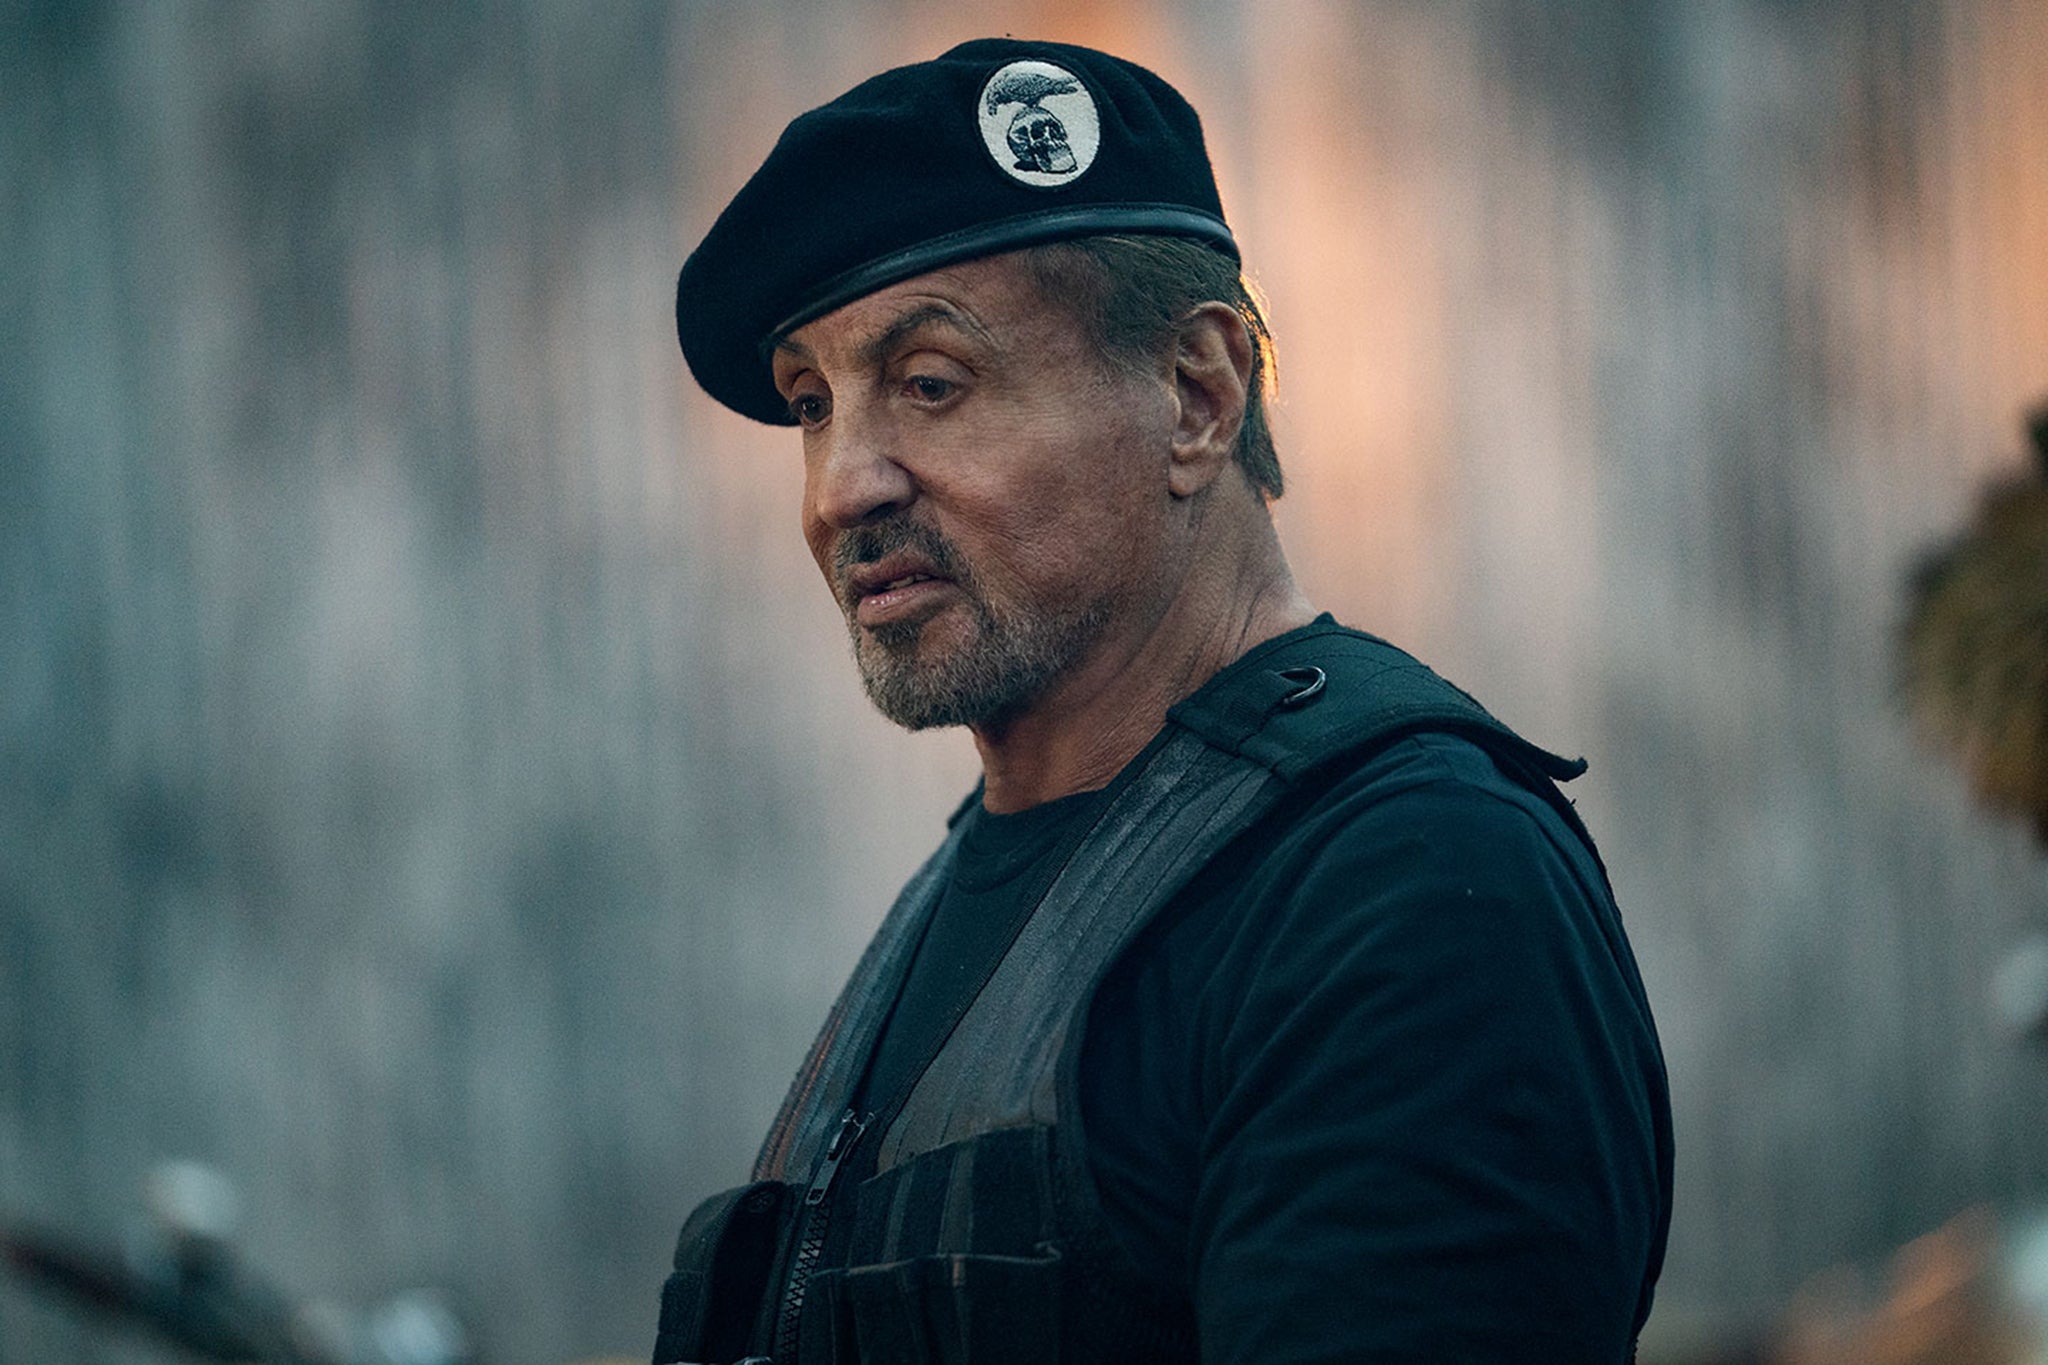 Sylvester Stallone as Barney Ross, a grizzled mercenary in ‘Expend4bles’